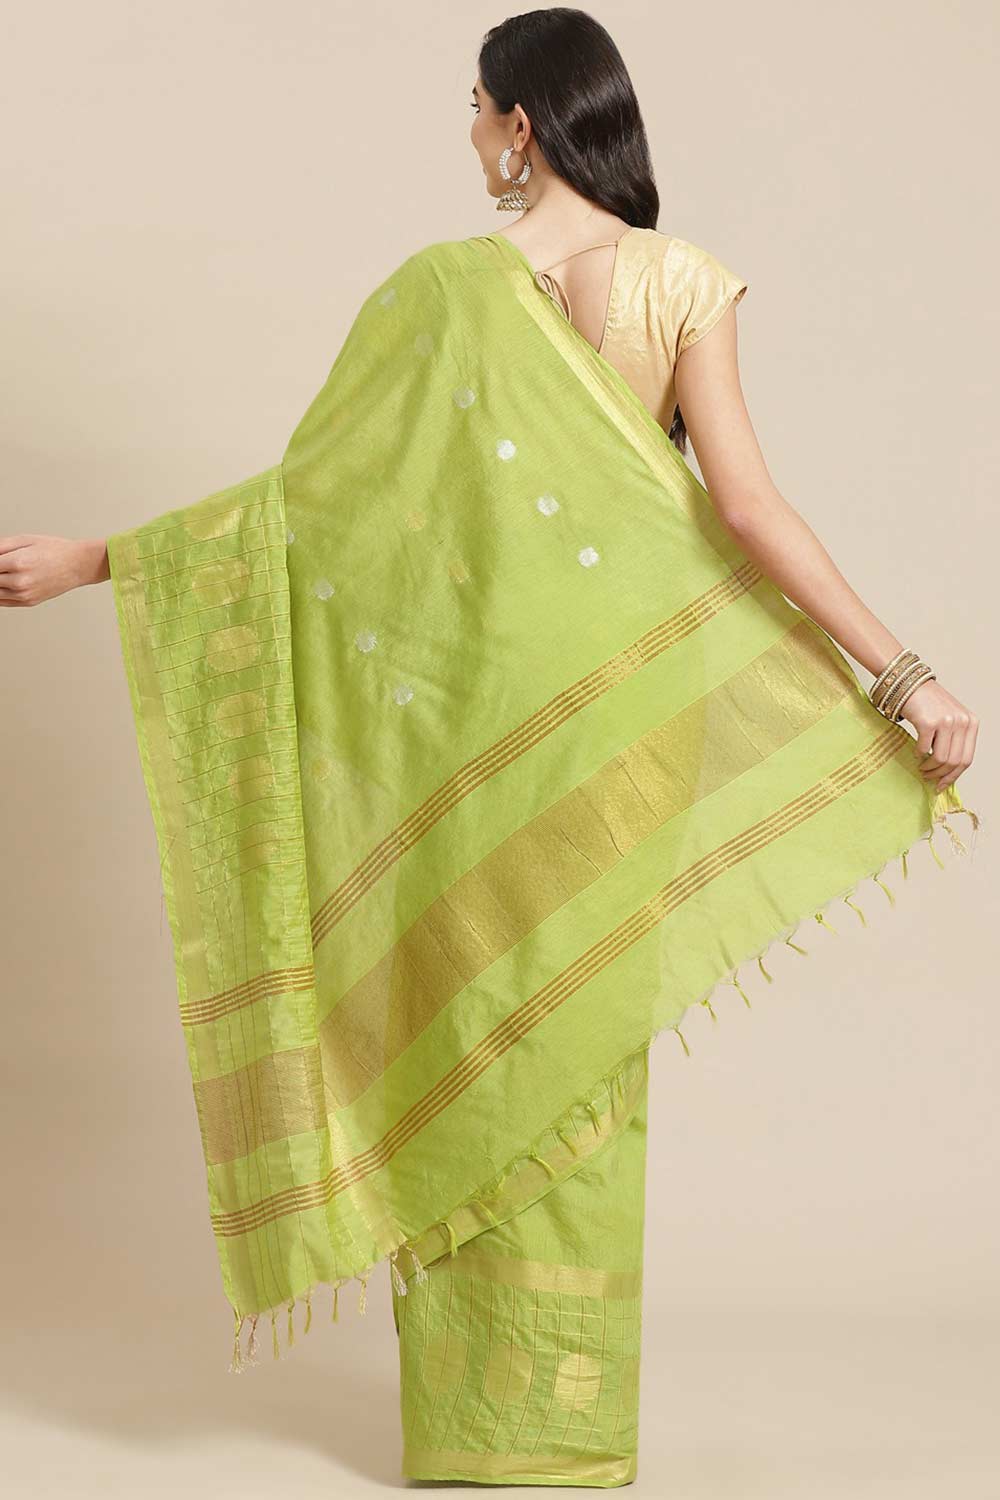 Shop Luna Light Green Zari Woven Blended Silk One Minute Saree at best offer at our  Store - One Minute Saree